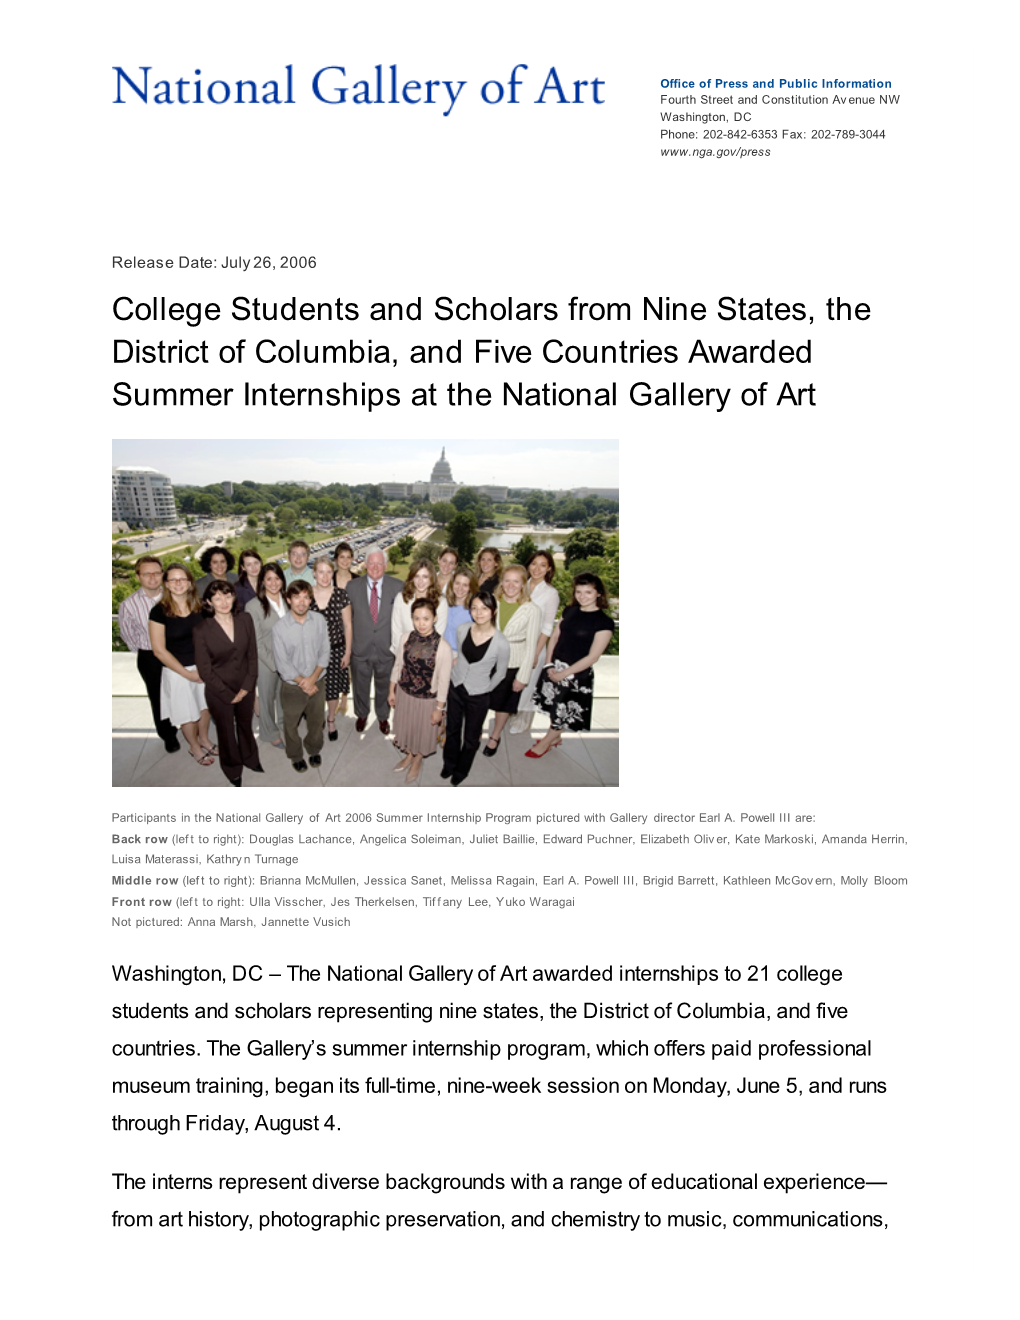 College Students and Scholars from Nine States, the District of Columbia, and Five Countries Awarded Summer Internships at the National Gallery of Art